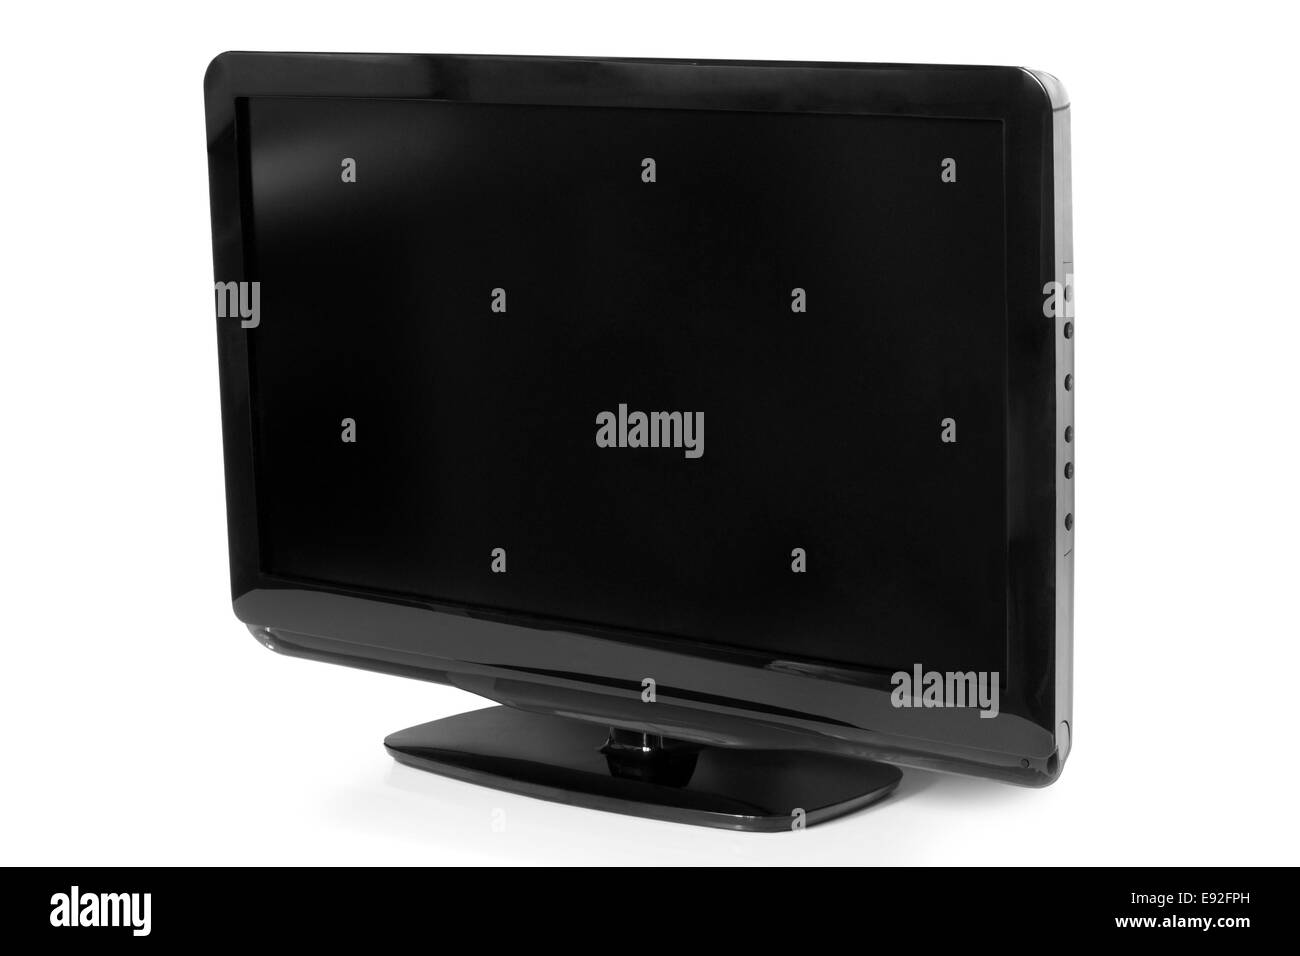 Led screen background Black and White Stock Photos & Images - Alamy